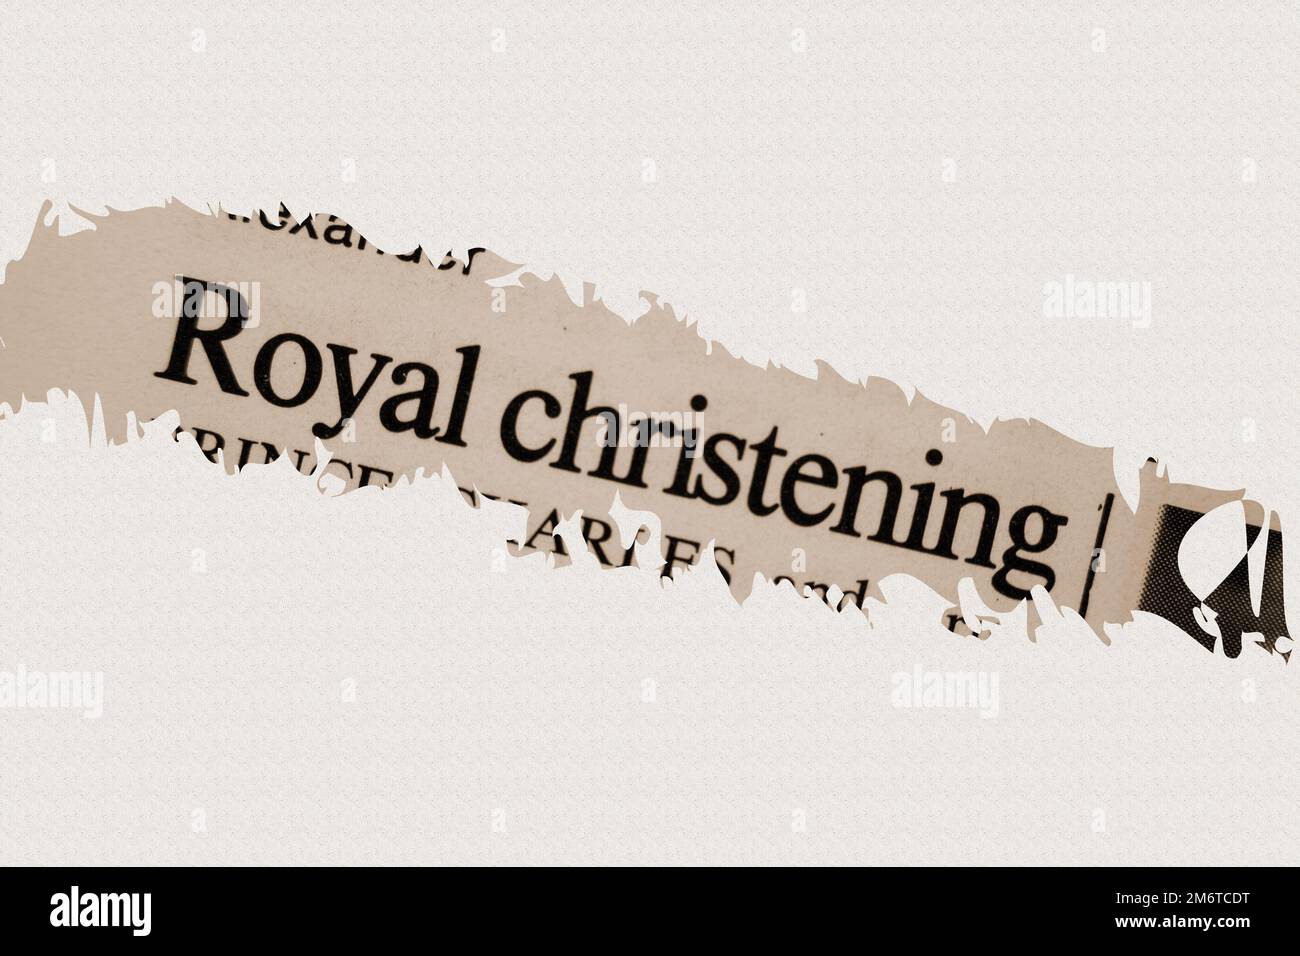 Royal christening - news story from 1975 newspaper headline article title with overlay in sepia Stock Photo